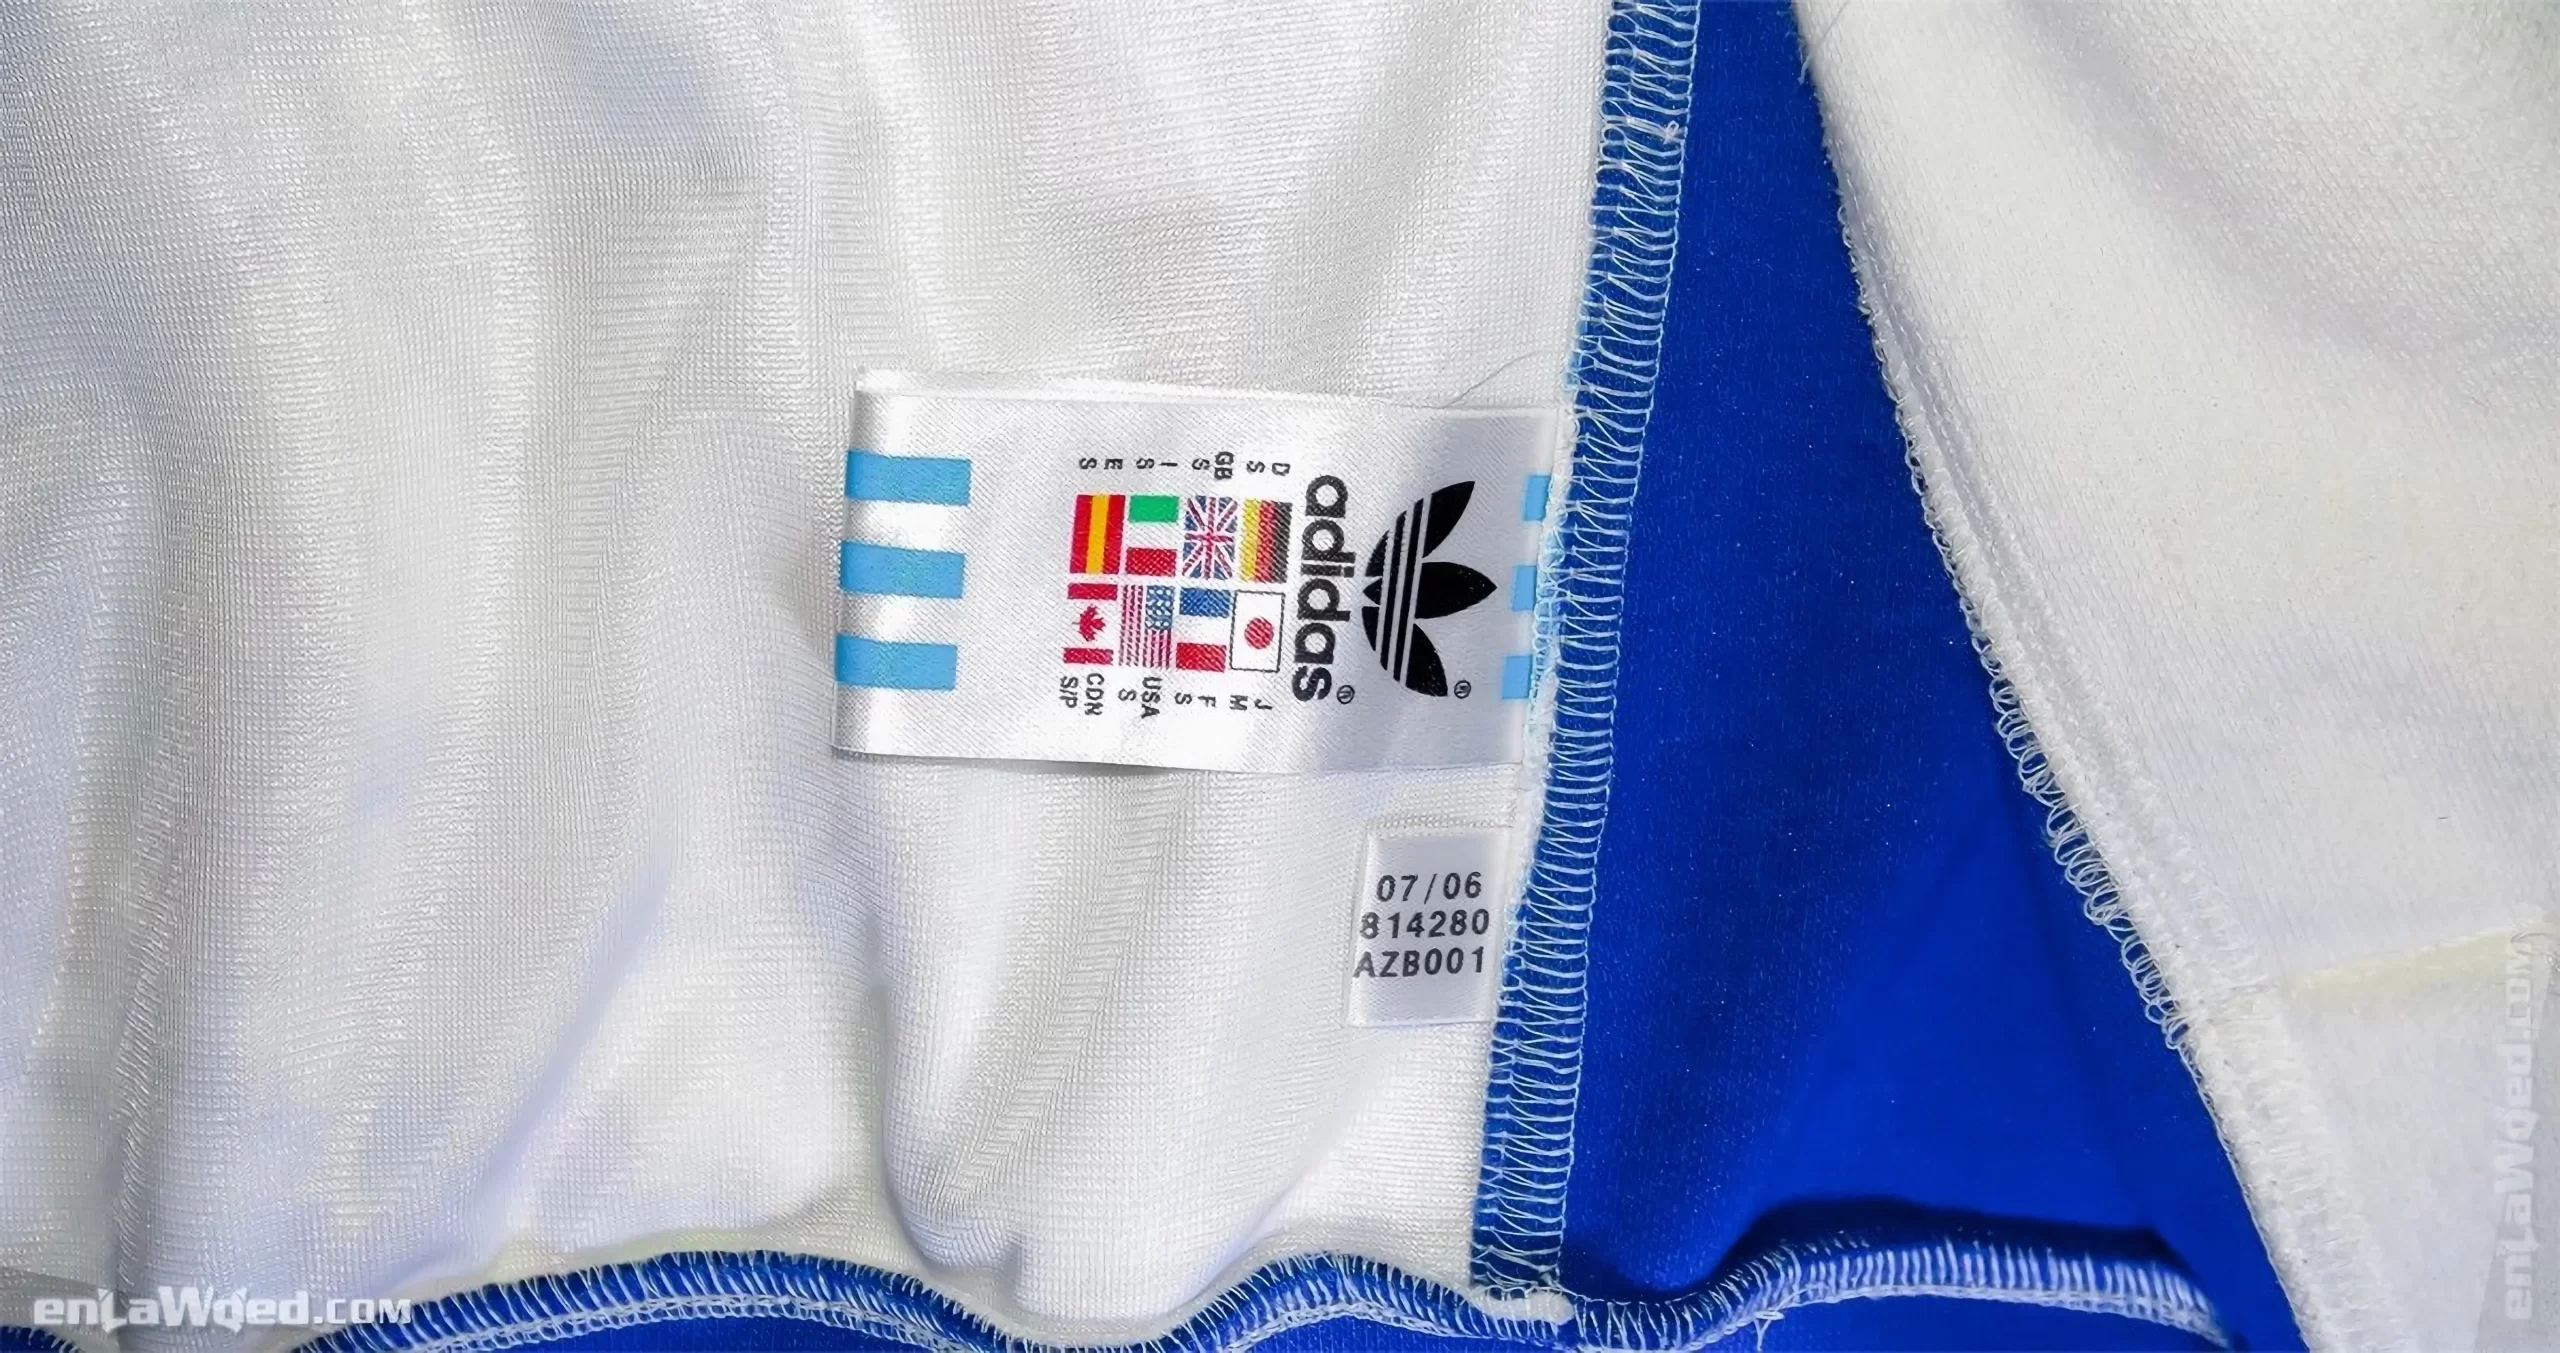 Adidas tag of the San Juan jacket, with the month and year of fabrication: 07/2006